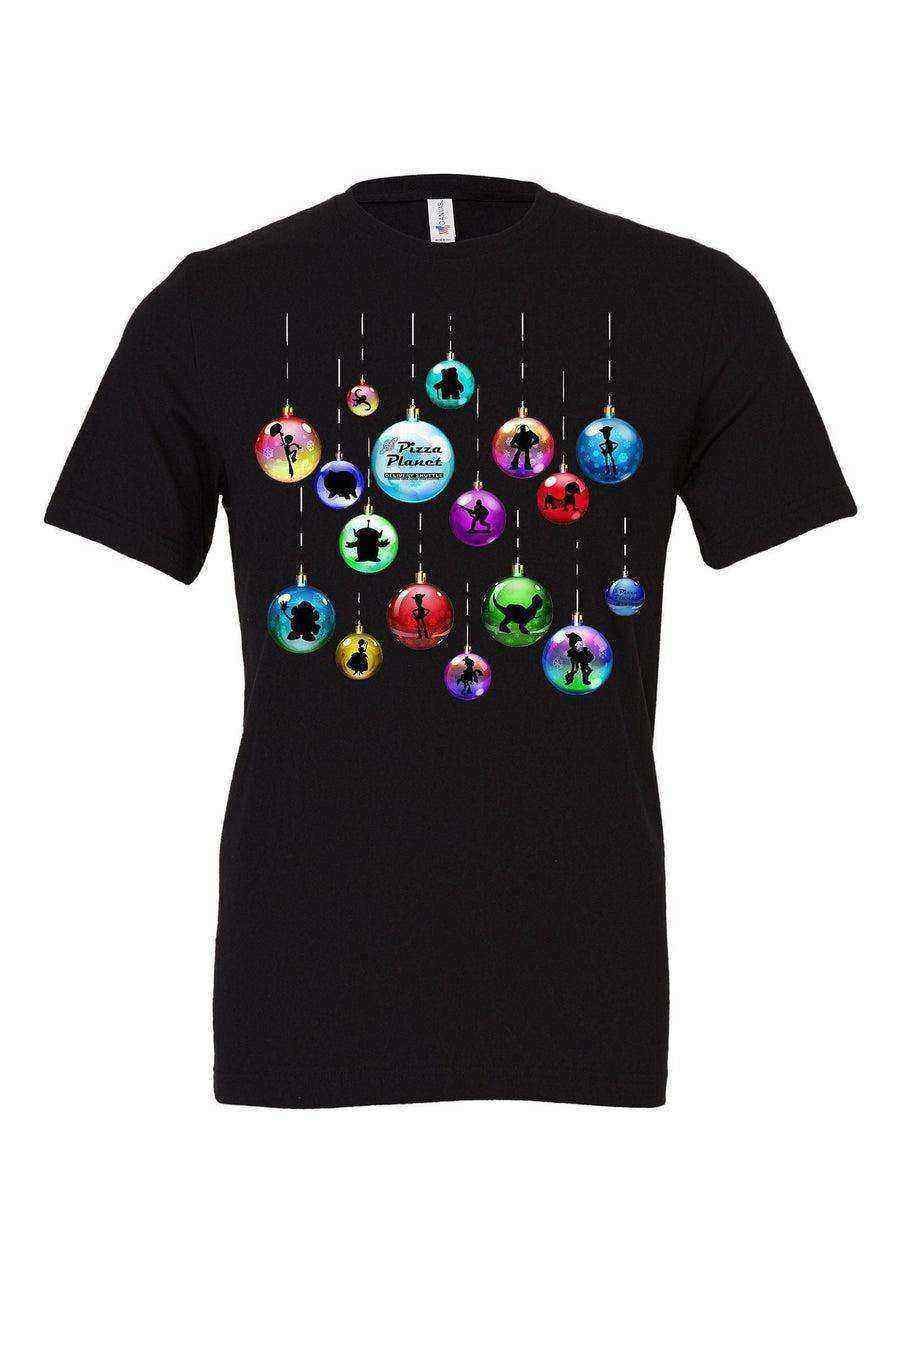 Womens | Toy Story Ornaments Shirt | Christmas In Tee | Christmas - Dylan's Tees